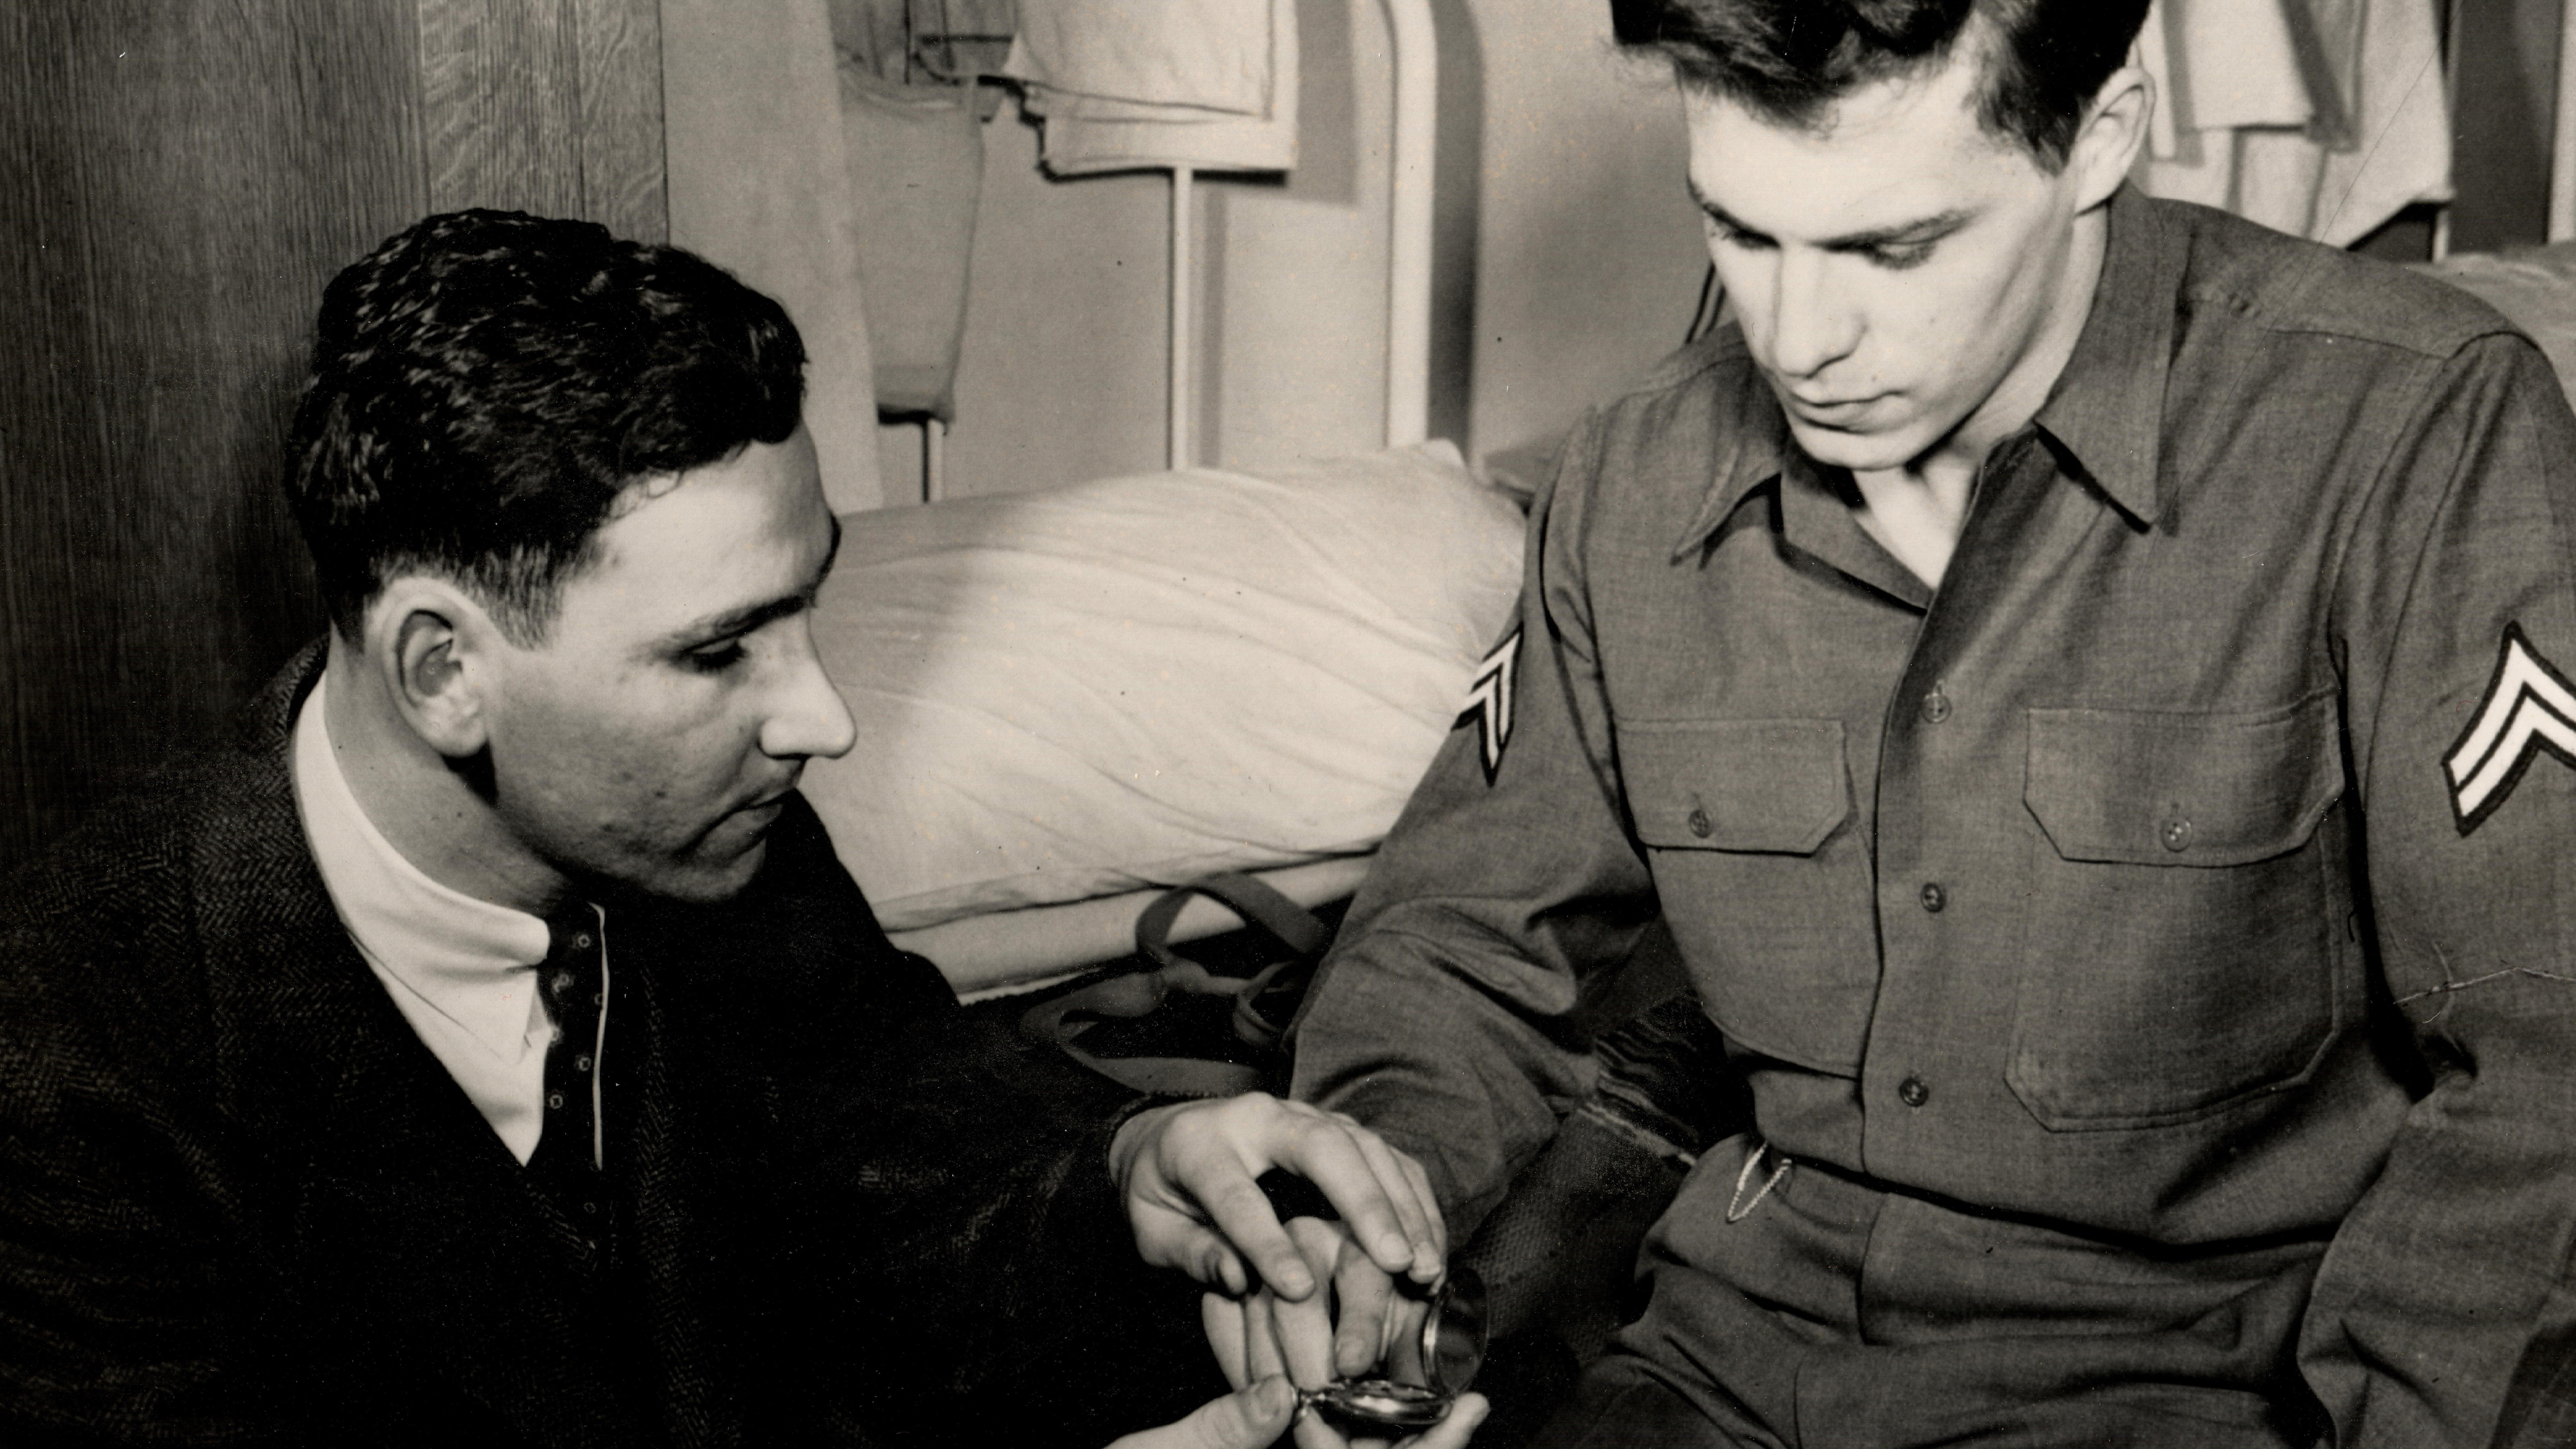 A man wearing a suit and tie kneels in front of a uniformed soldier sitting beside a hospital bed. He guides the soldier’s fingers to the dial of an open pocket watch.